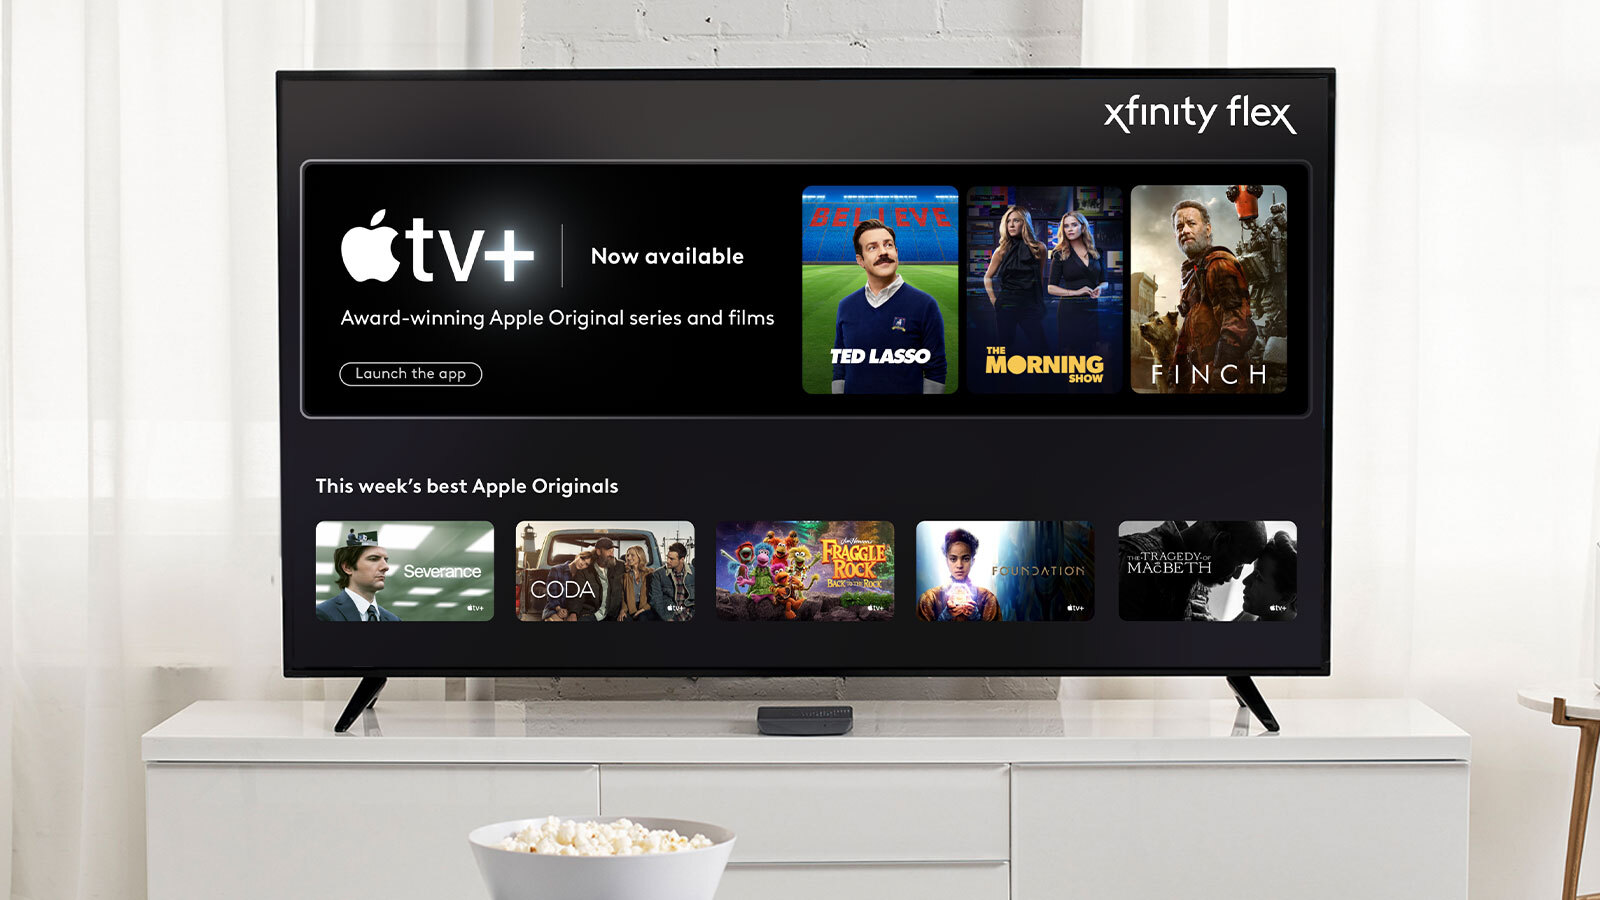 Marketing image showcasing the official Apple TV+ app from Comcast on Xfinity Flex 